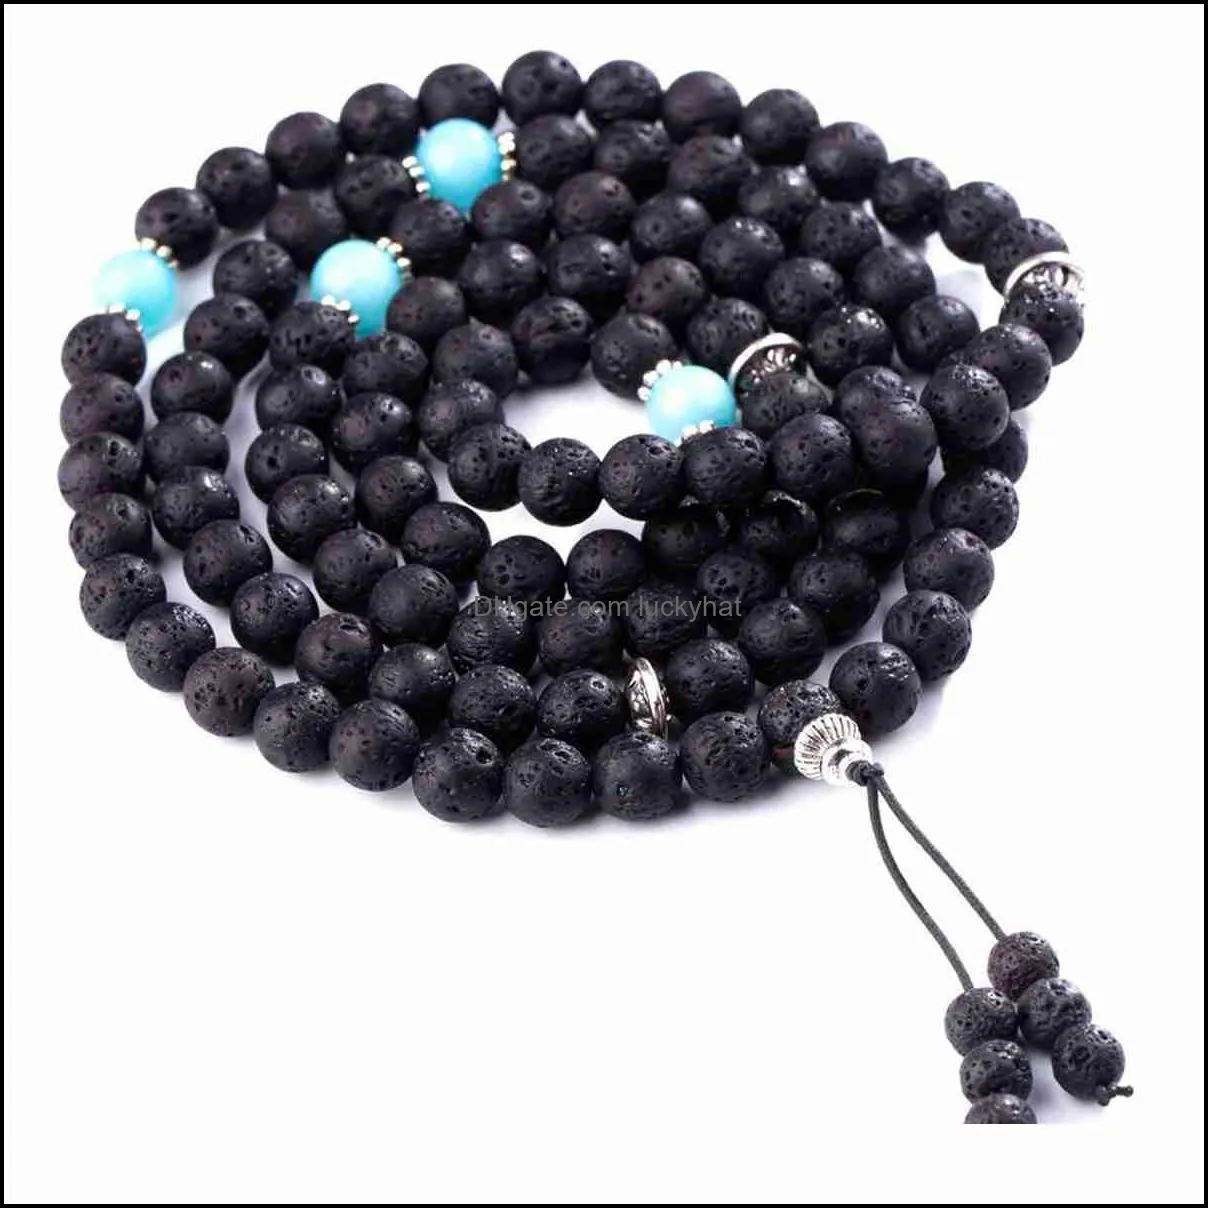 10pc/set Natural Stone Beads Elastic Lava Rock Bracelet With Round Stainless Steel Charm Bead Handmade Jewelry